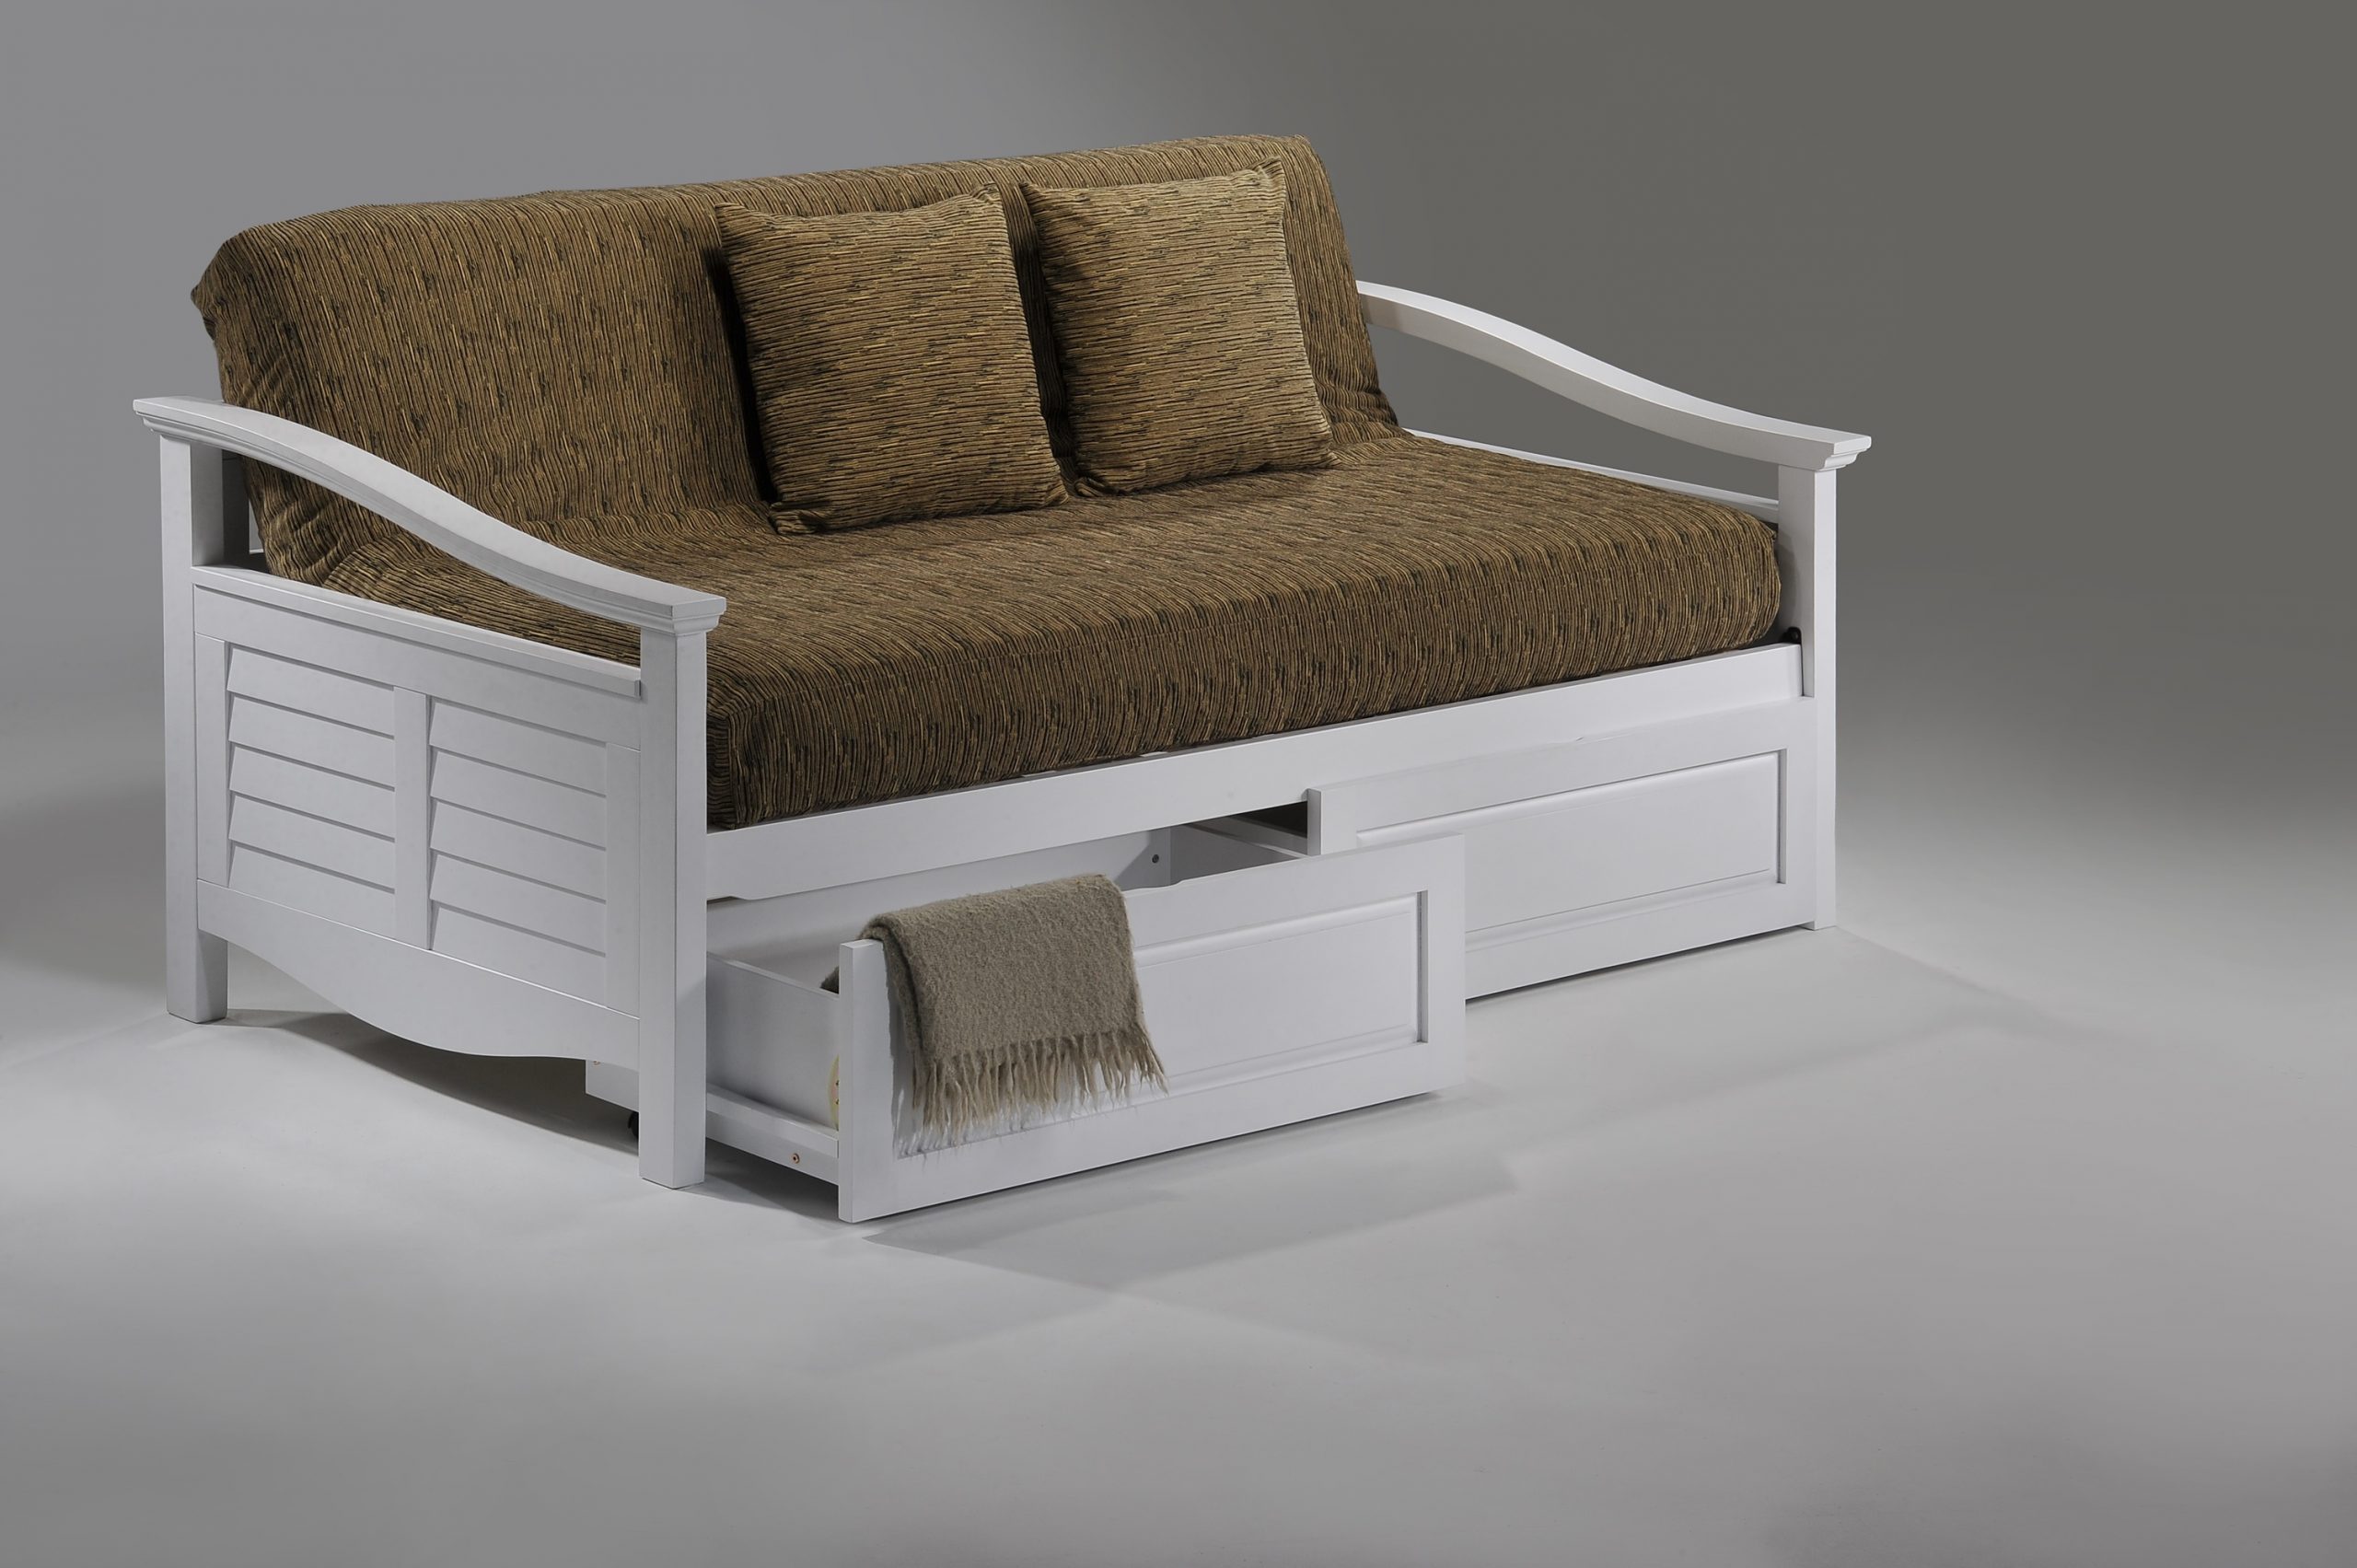 Seagull Daybed w Cinnamon Storage Drawer opened (WH)